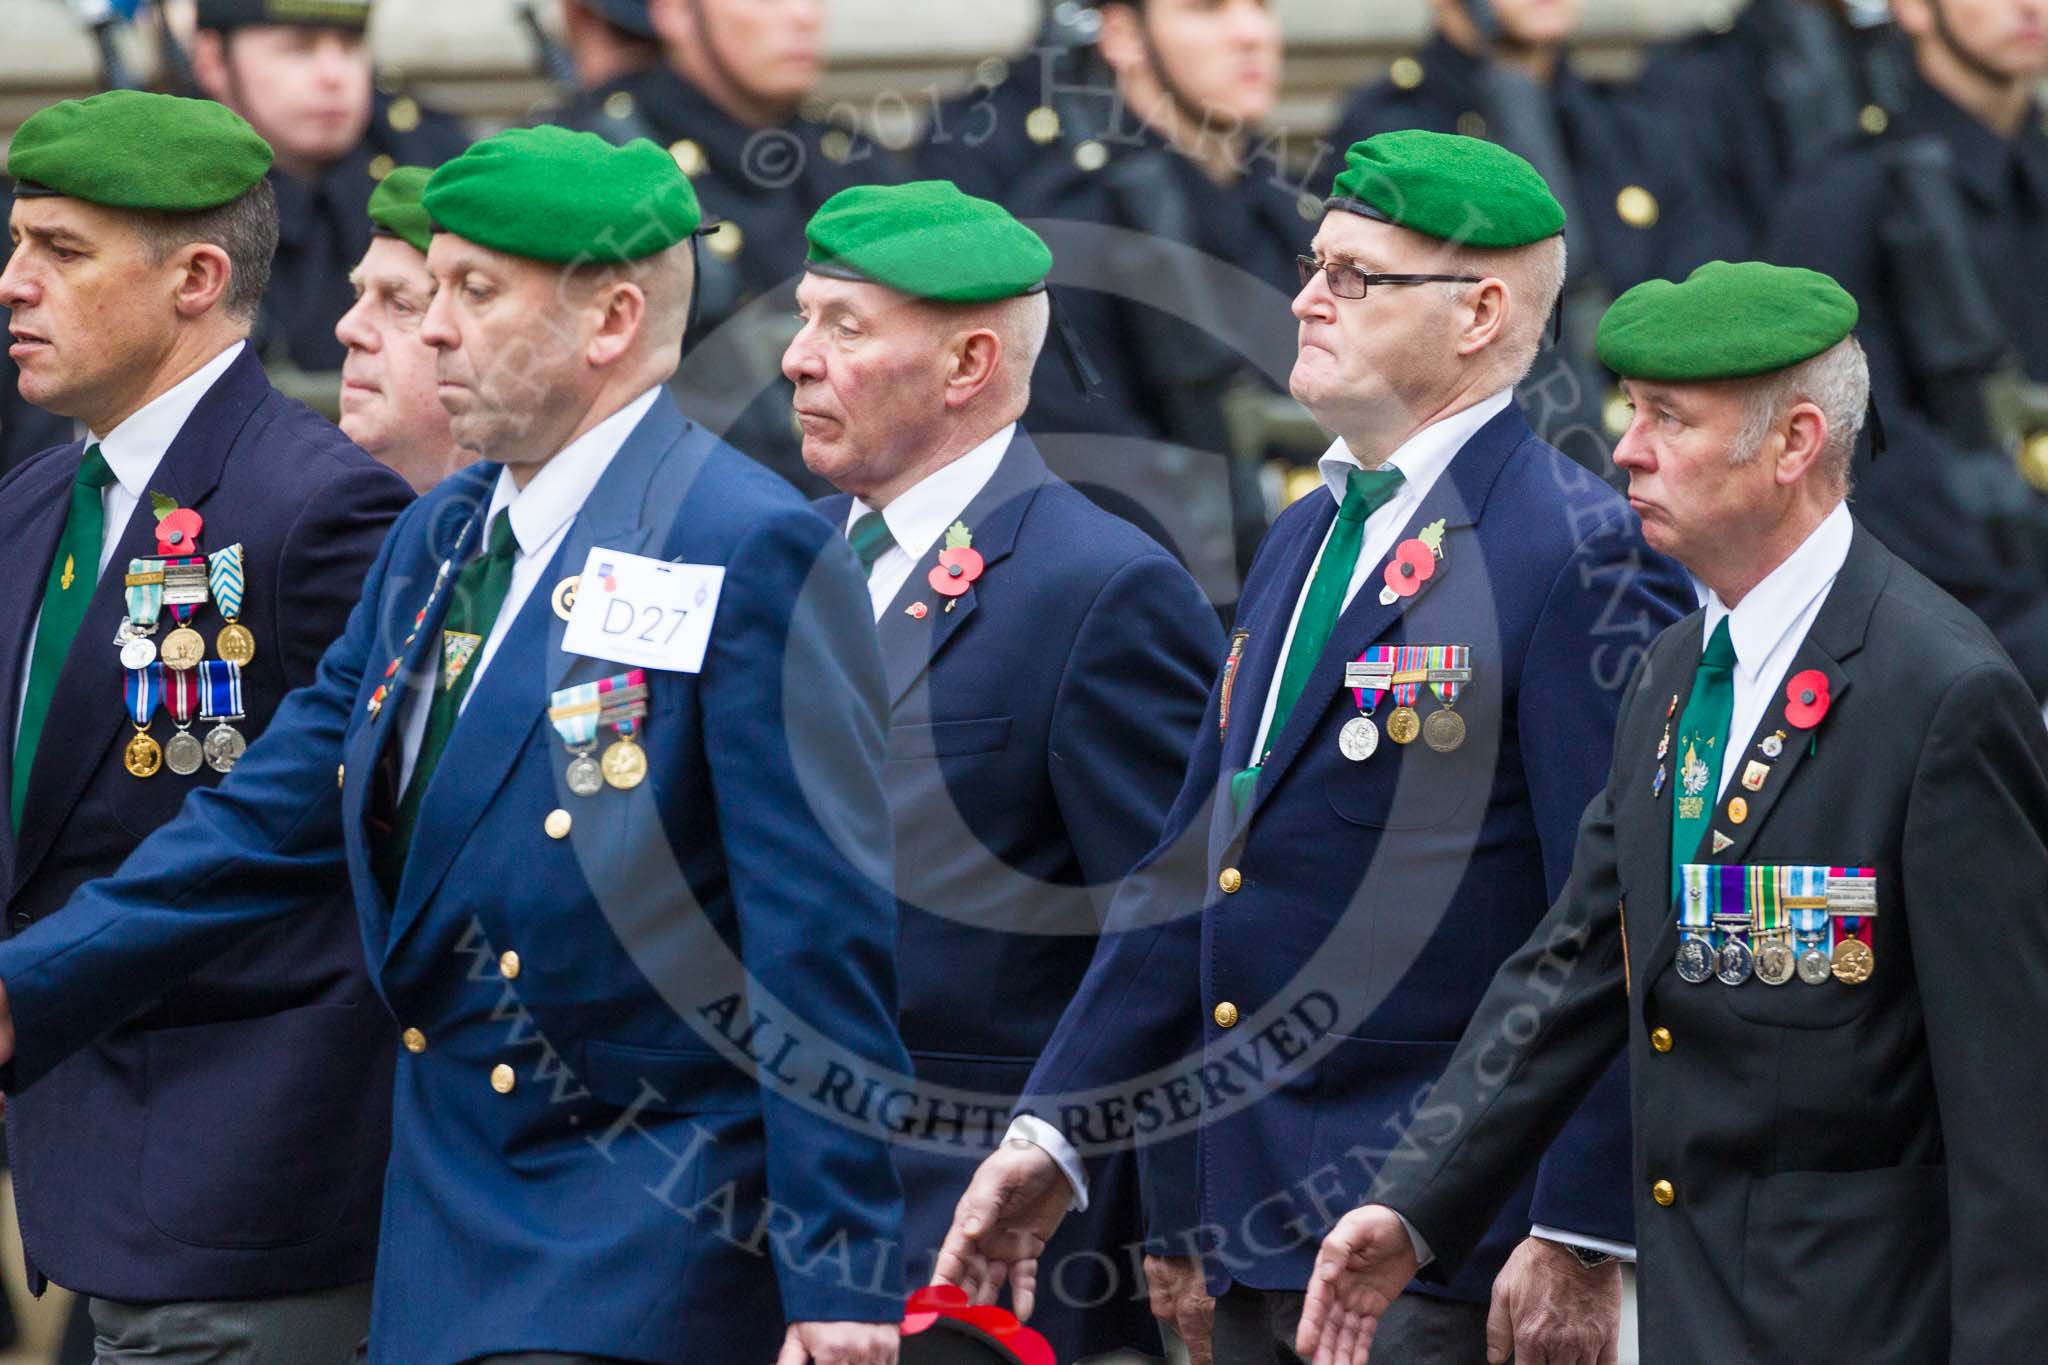 Remembrance Sunday at the Cenotaph 2015: Group D27, Foreign Legion Association.
Cenotaph, Whitehall, London SW1,
London,
Greater London,
United Kingdom,
on 08 November 2015 at 11:56, image #741